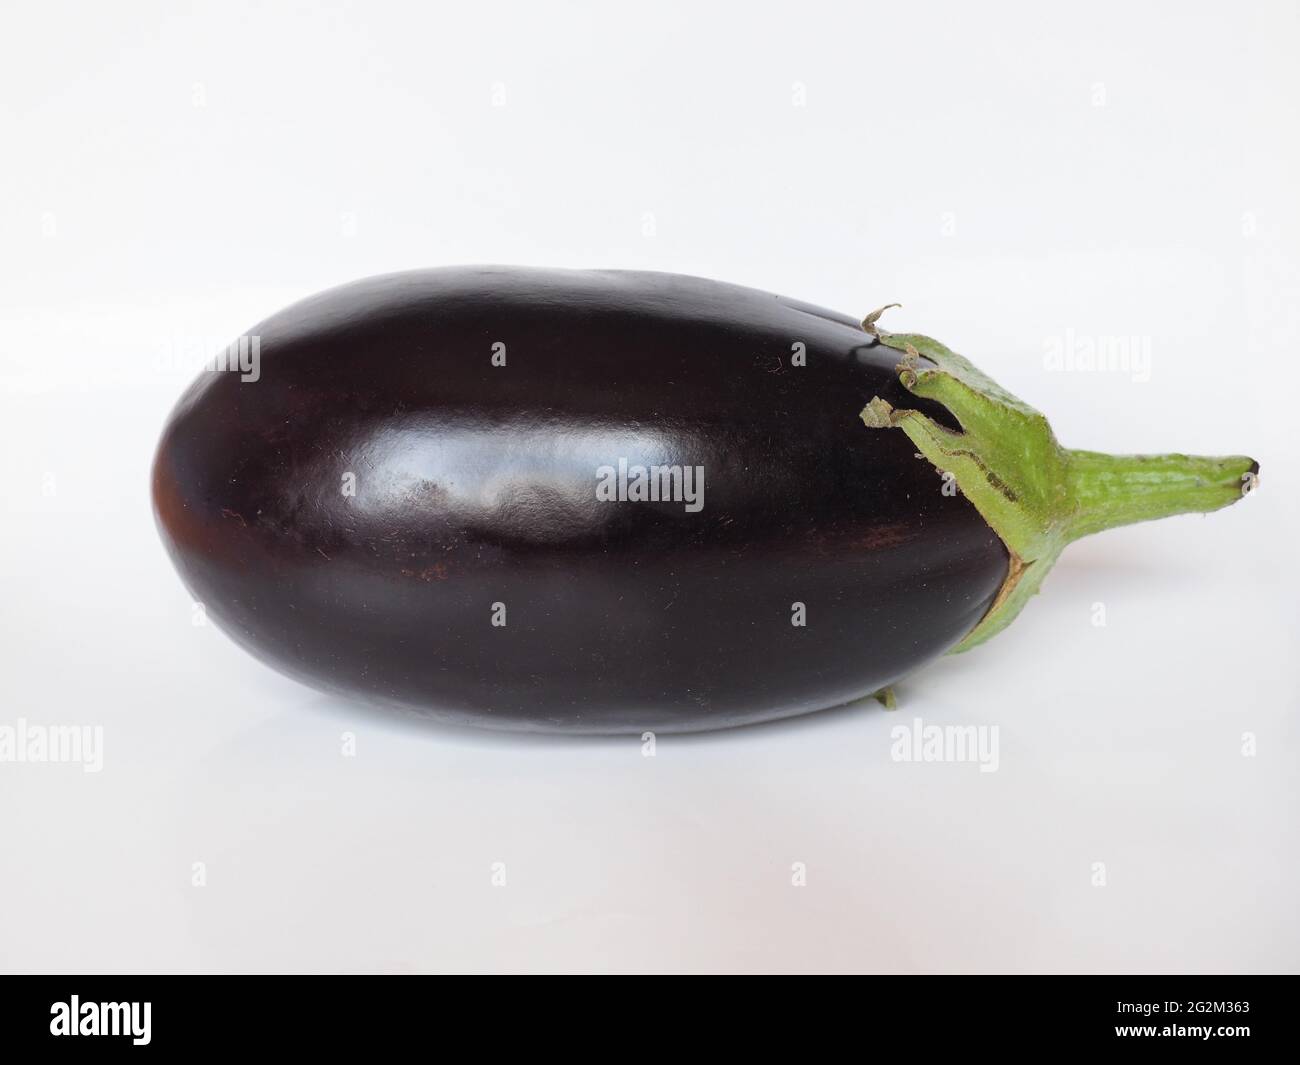 single vegetables pictures with names